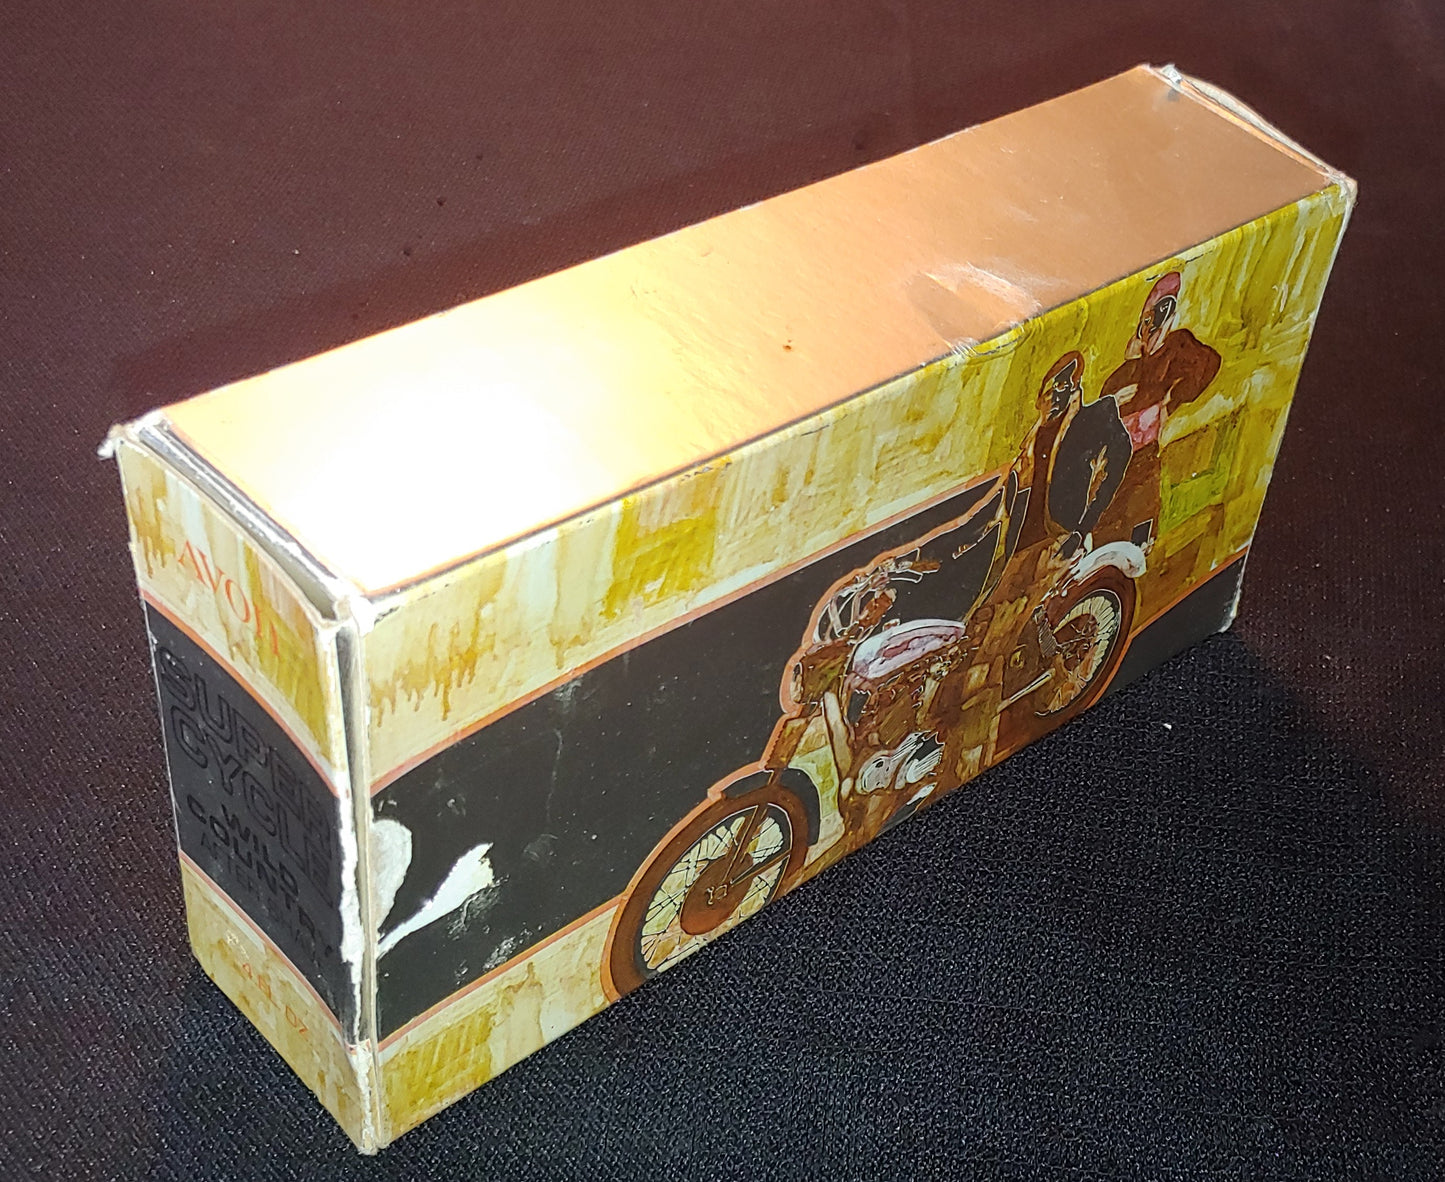 Vroom Vroom! Vintage Avon Super Cycle Wild Country Motorcycle Aftershave Bottle Box